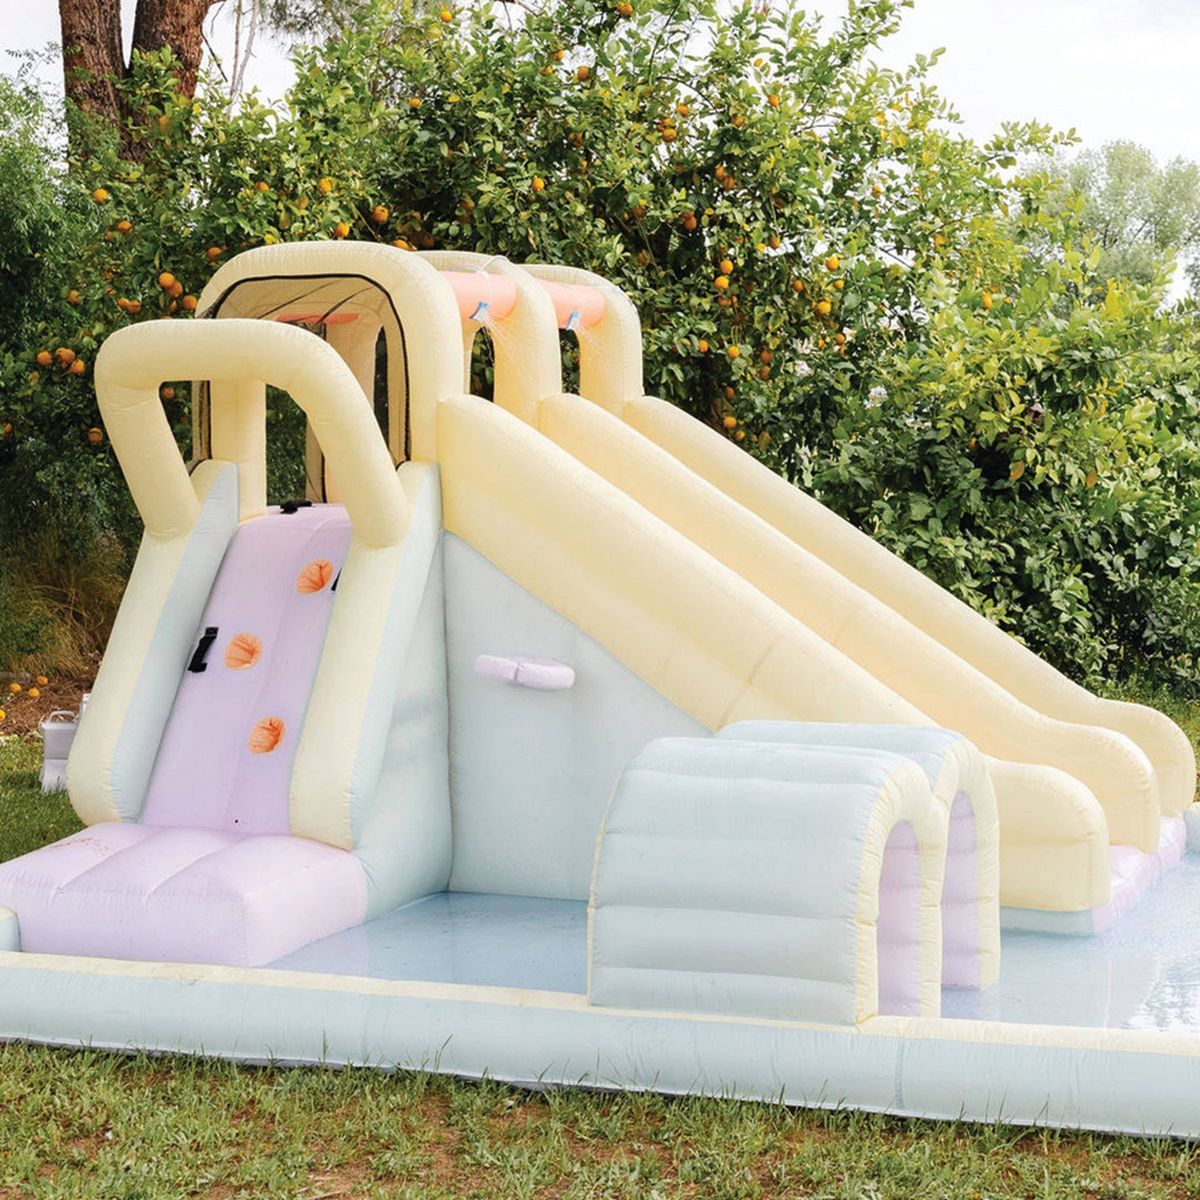 SMOL Splash Inflatable Outdoor Water Park and Pool | Target